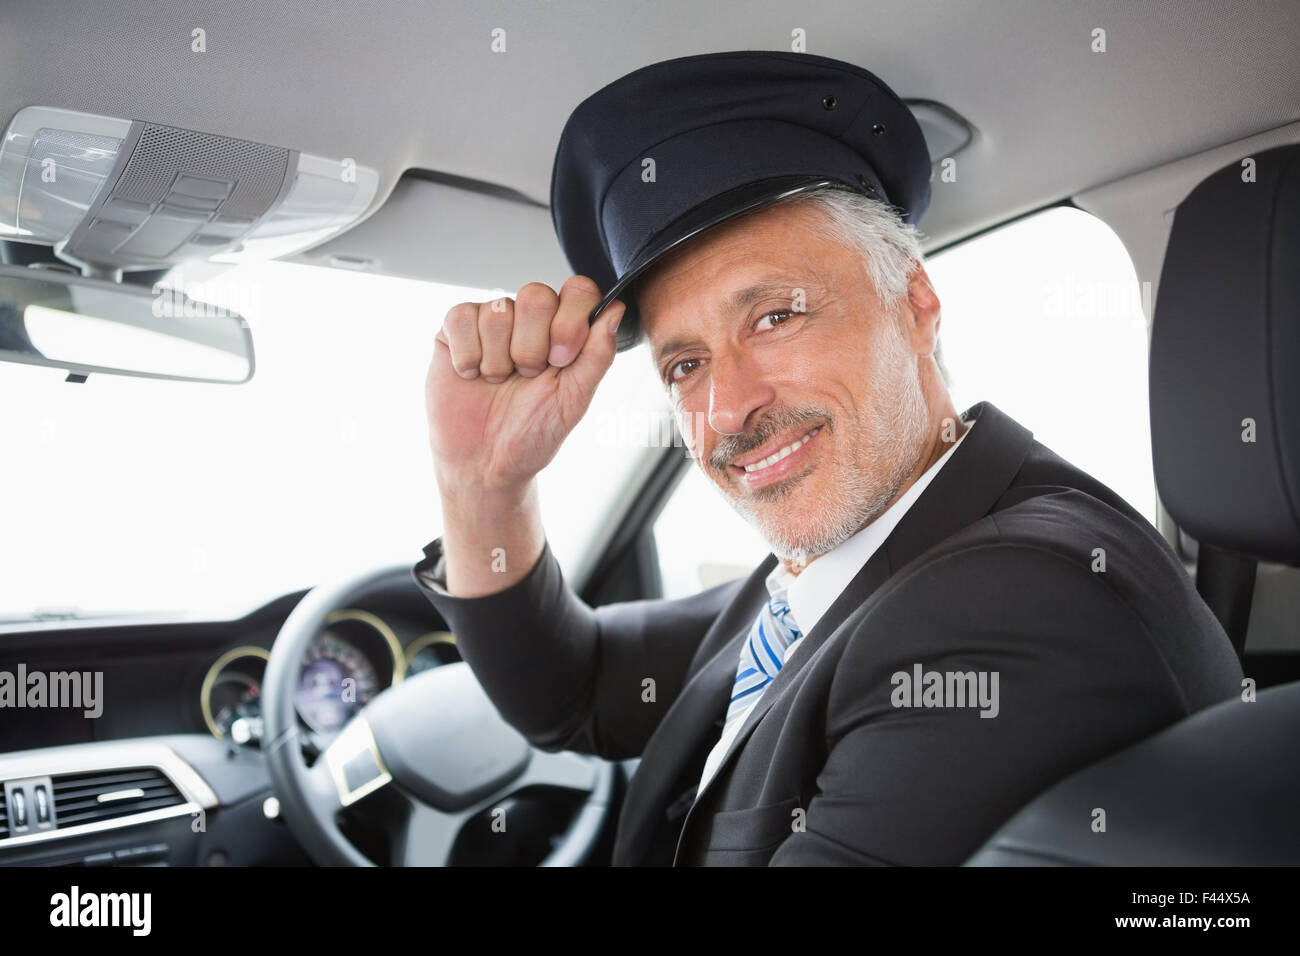 Handsome chauffeur smiling at camera Stock Photo